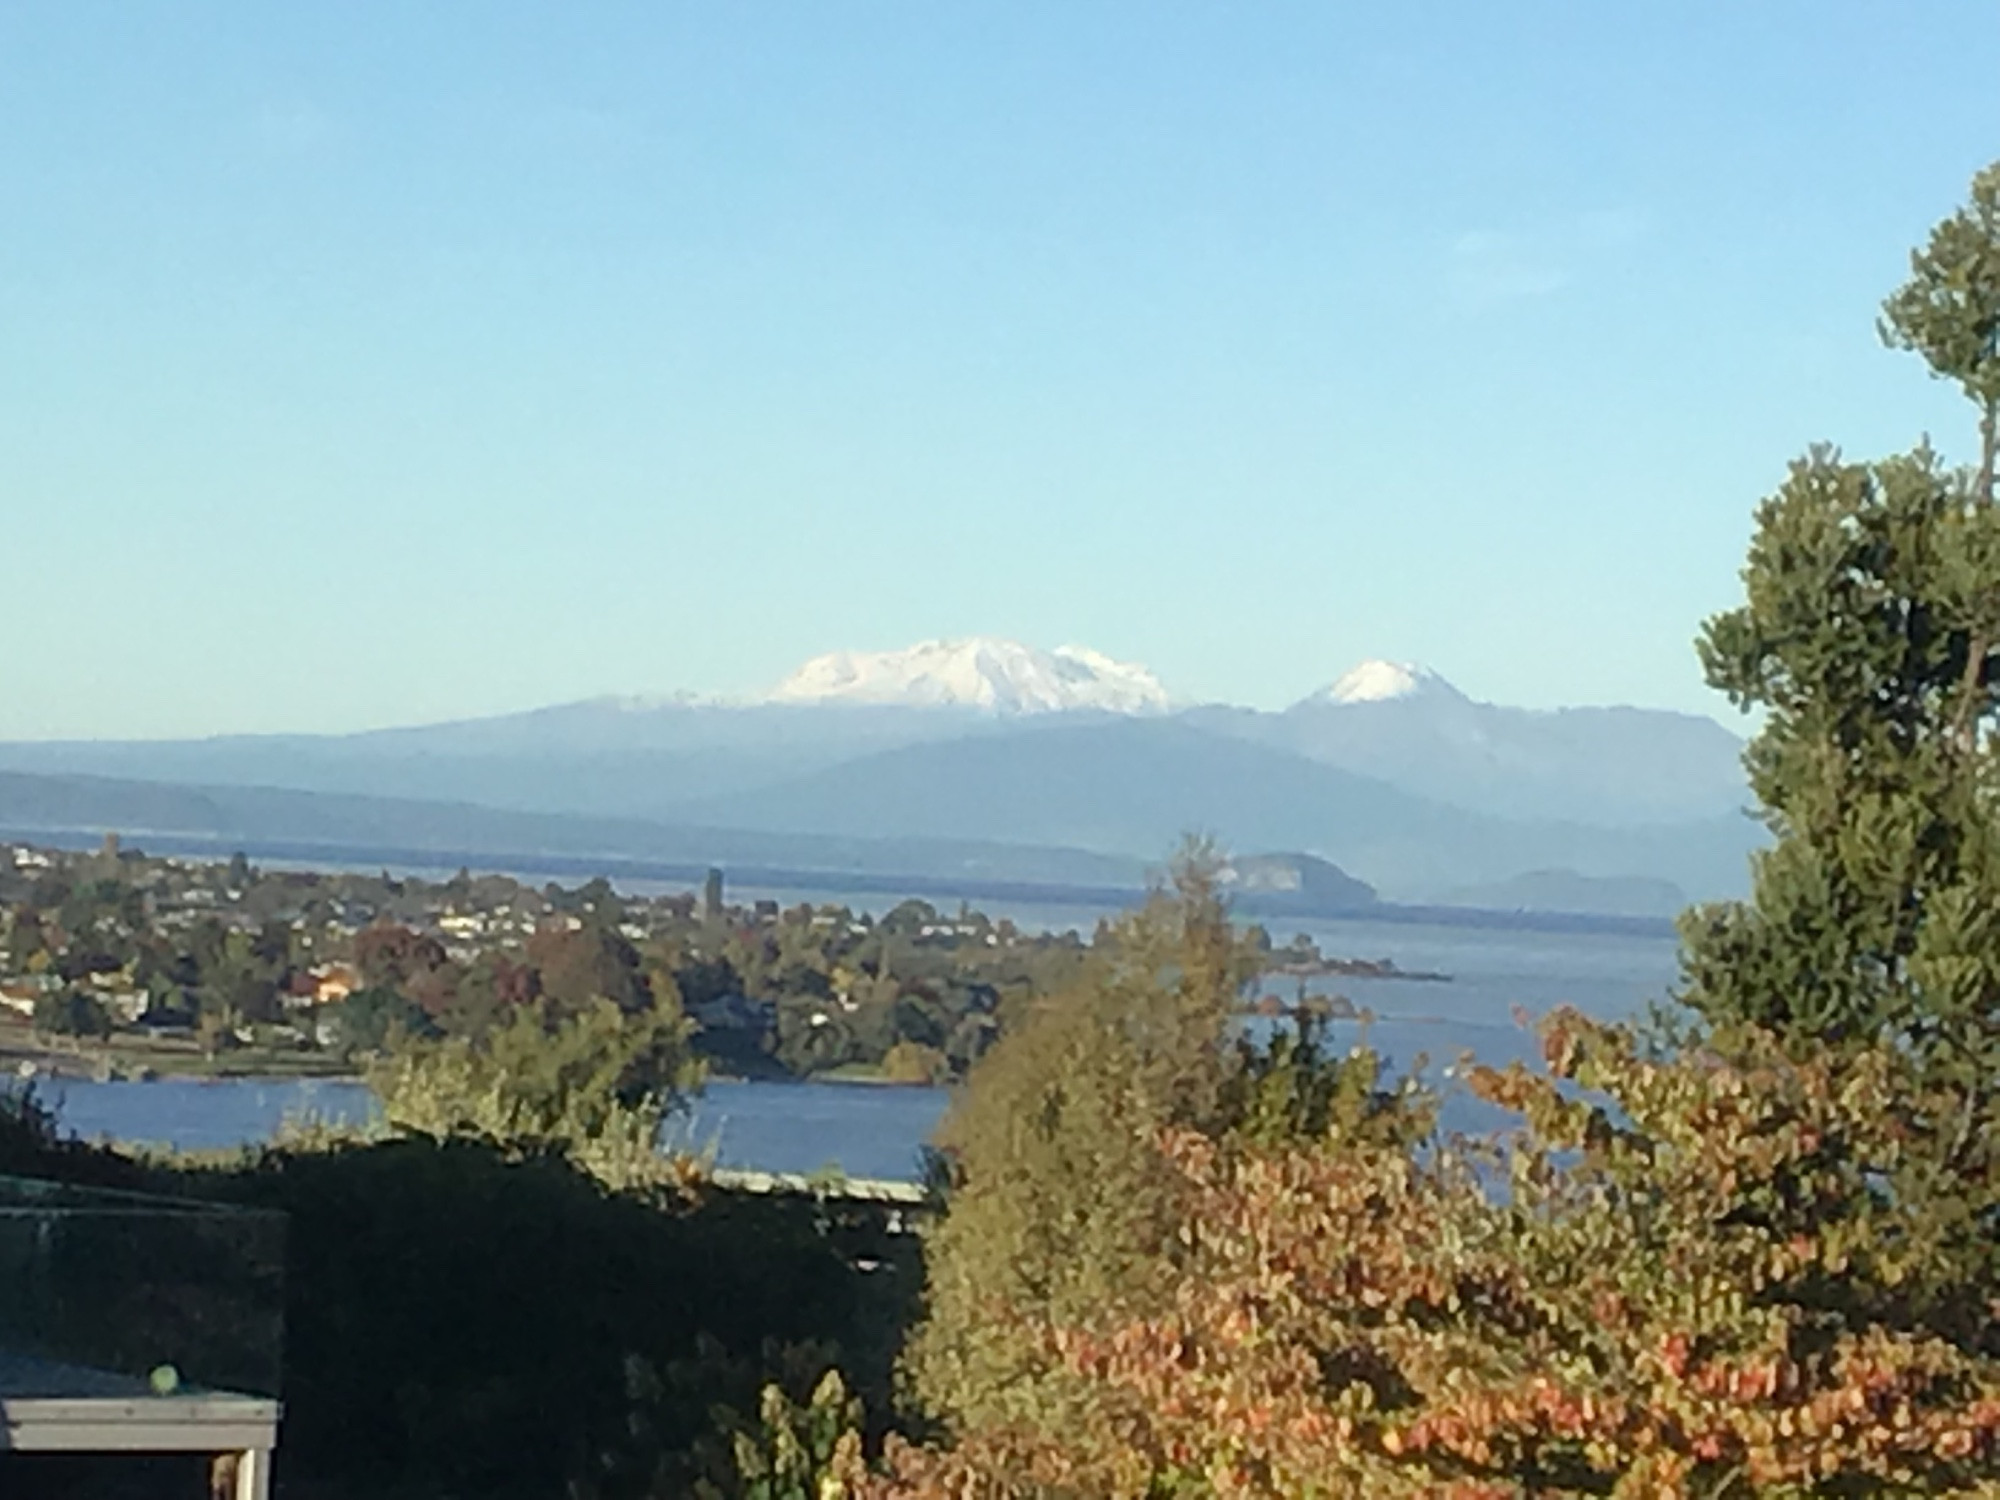 Lake Taupo with Ruapehu and Ngarahoe in the background. 